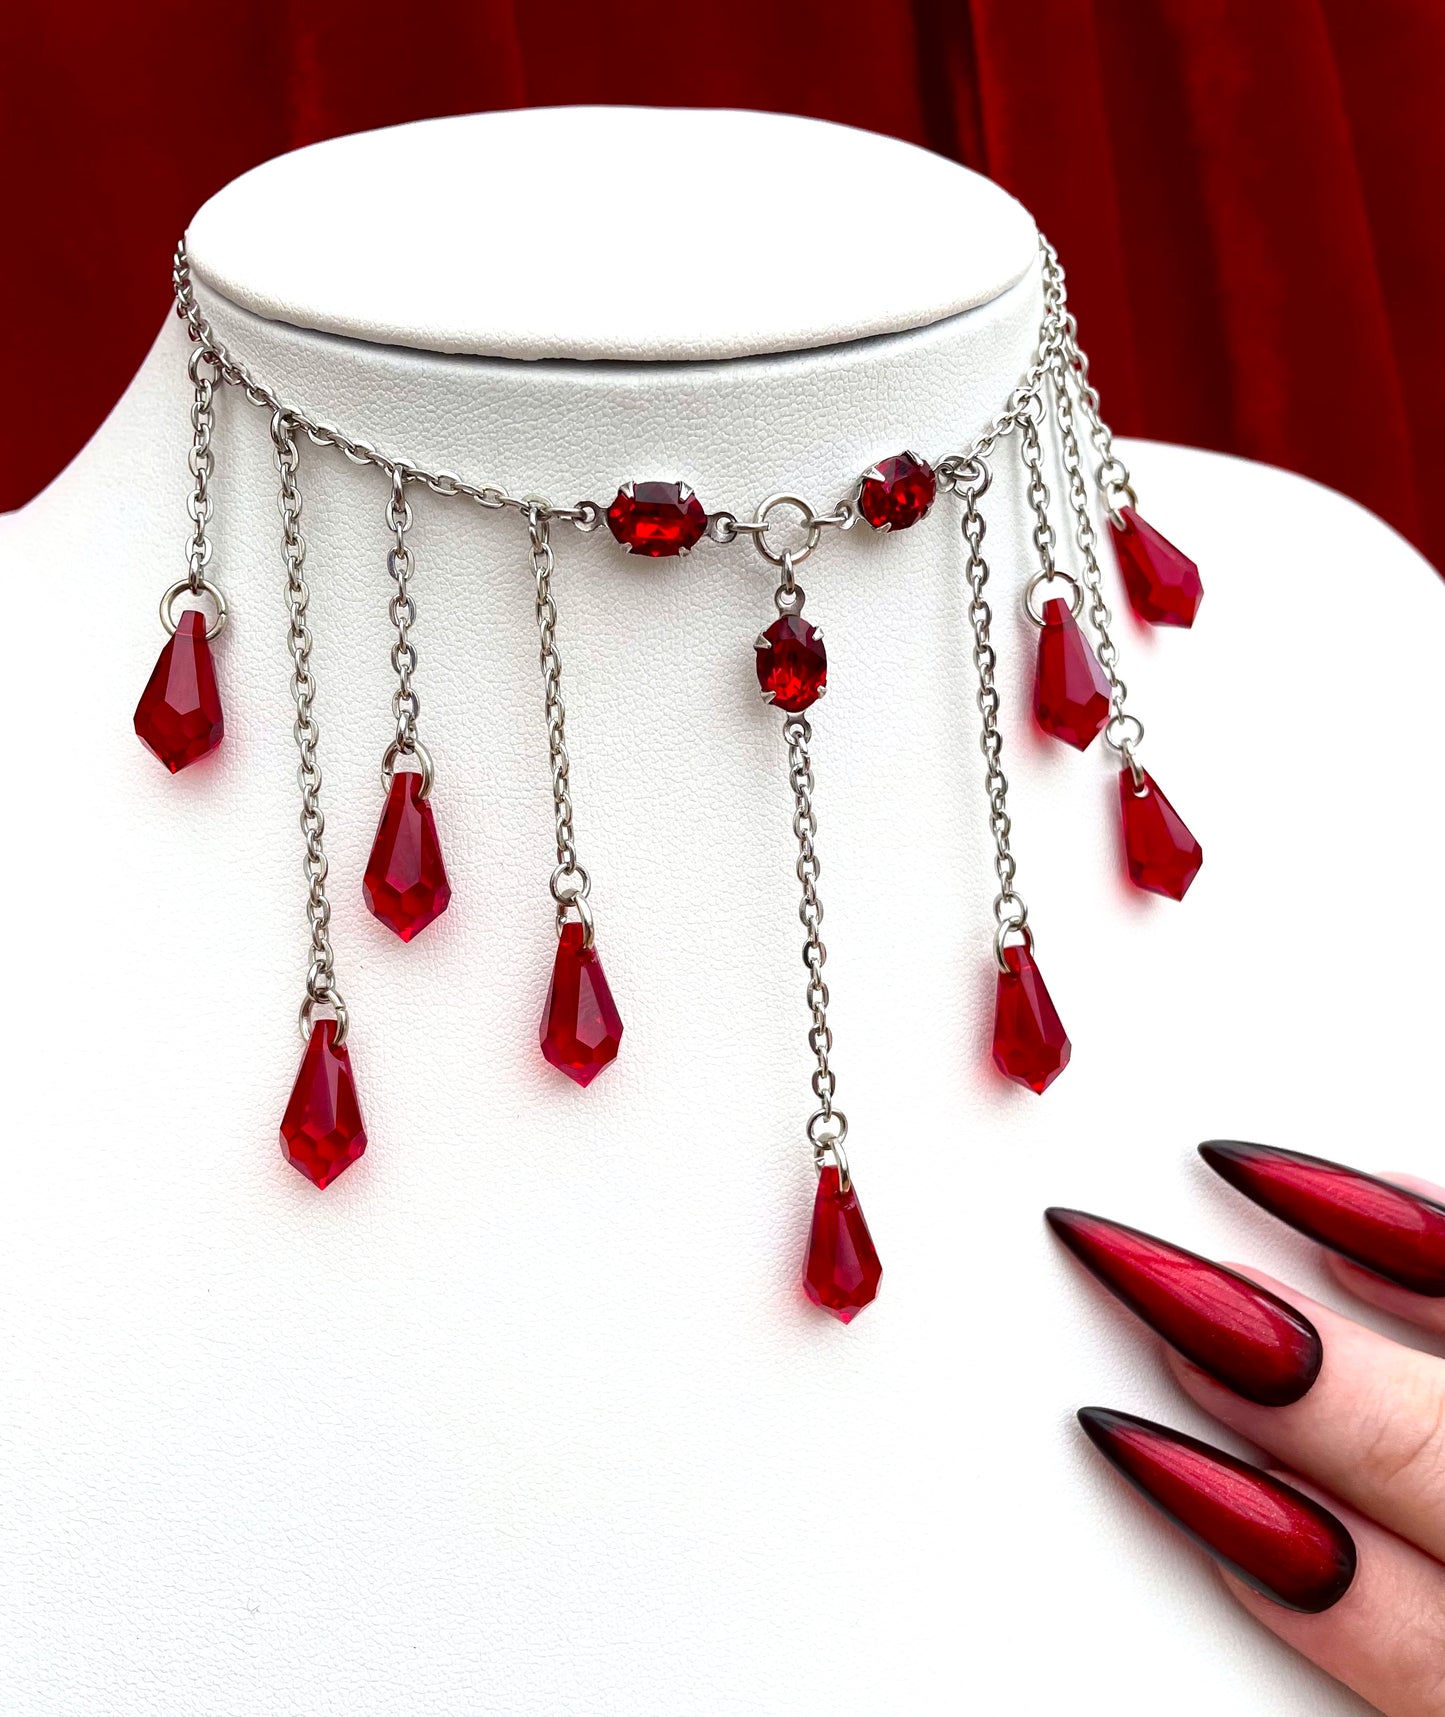 Dainty blood drop necklace, dainty necklace, dainty blood necklace, dainty drop necklace, dainty red drop necklace, Gothic drop necklace, red drop necklace, necklace with red drops, silver necklace with drops, gothic necklace, goth necklace, goth jeweller